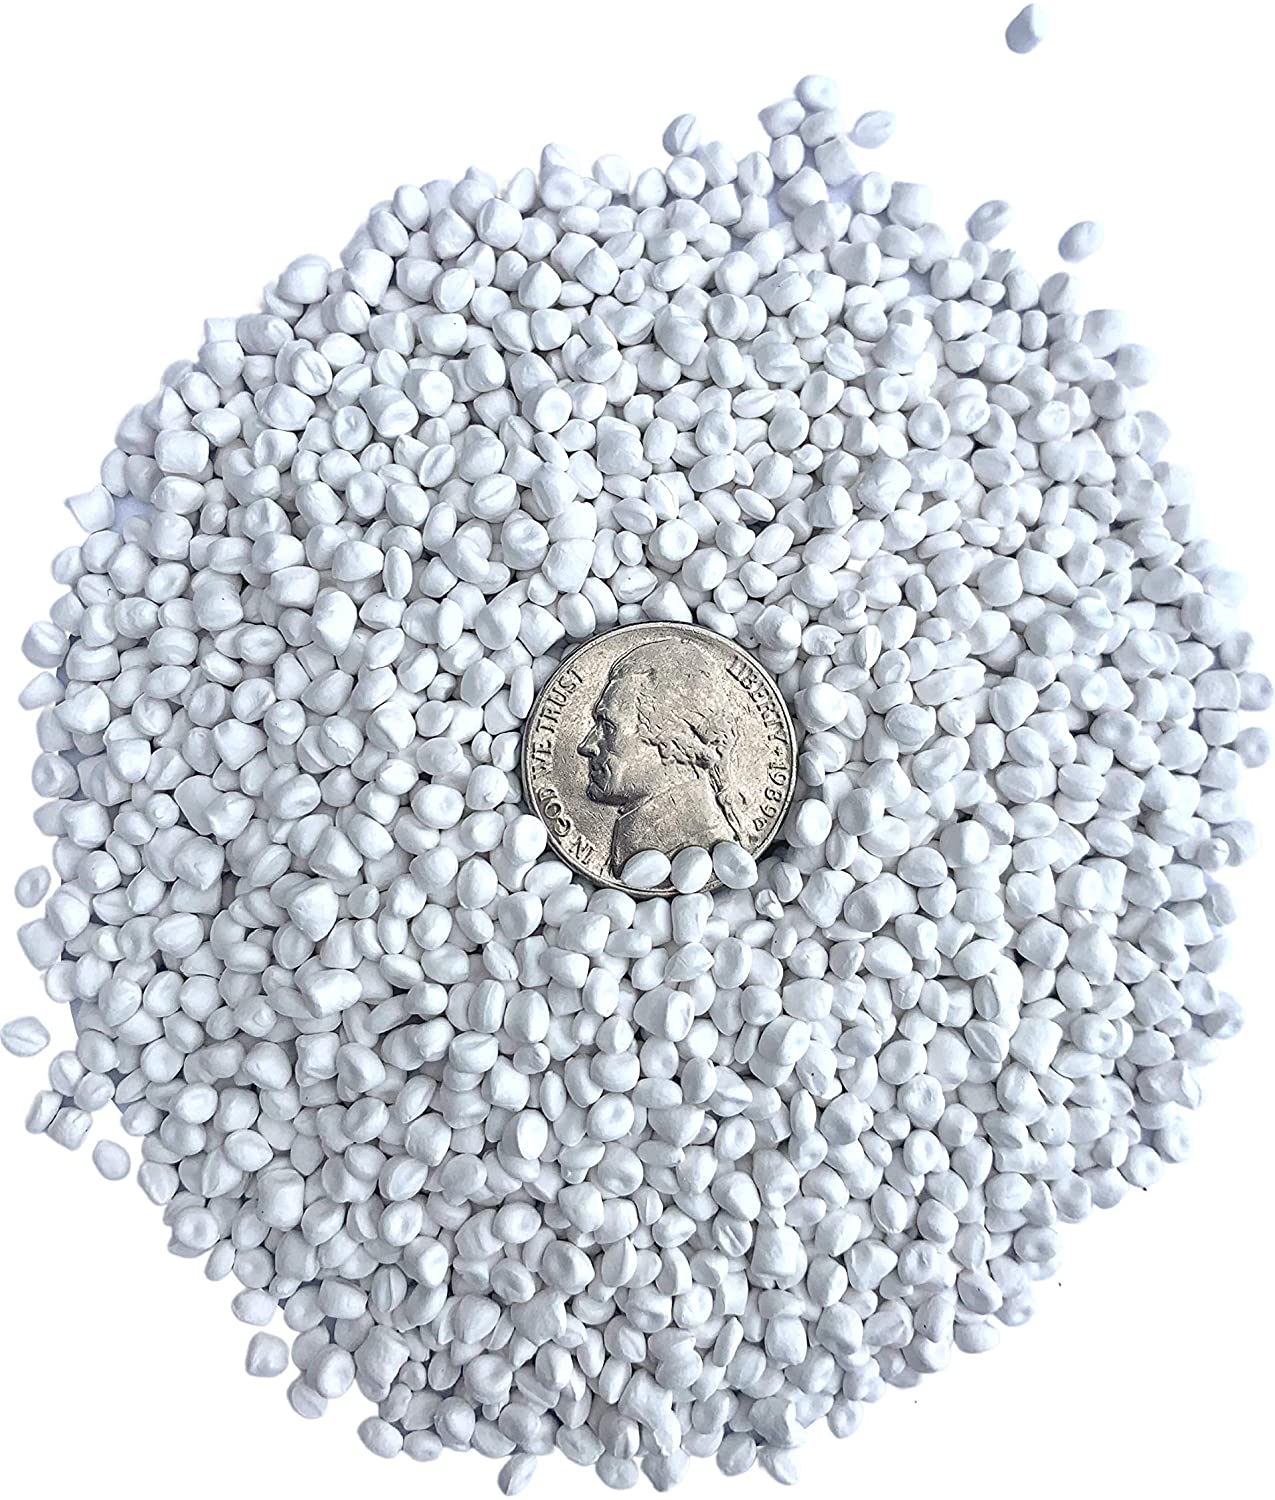 Plastic Pellets Bulk for Weighted Blankets by Roly Poly